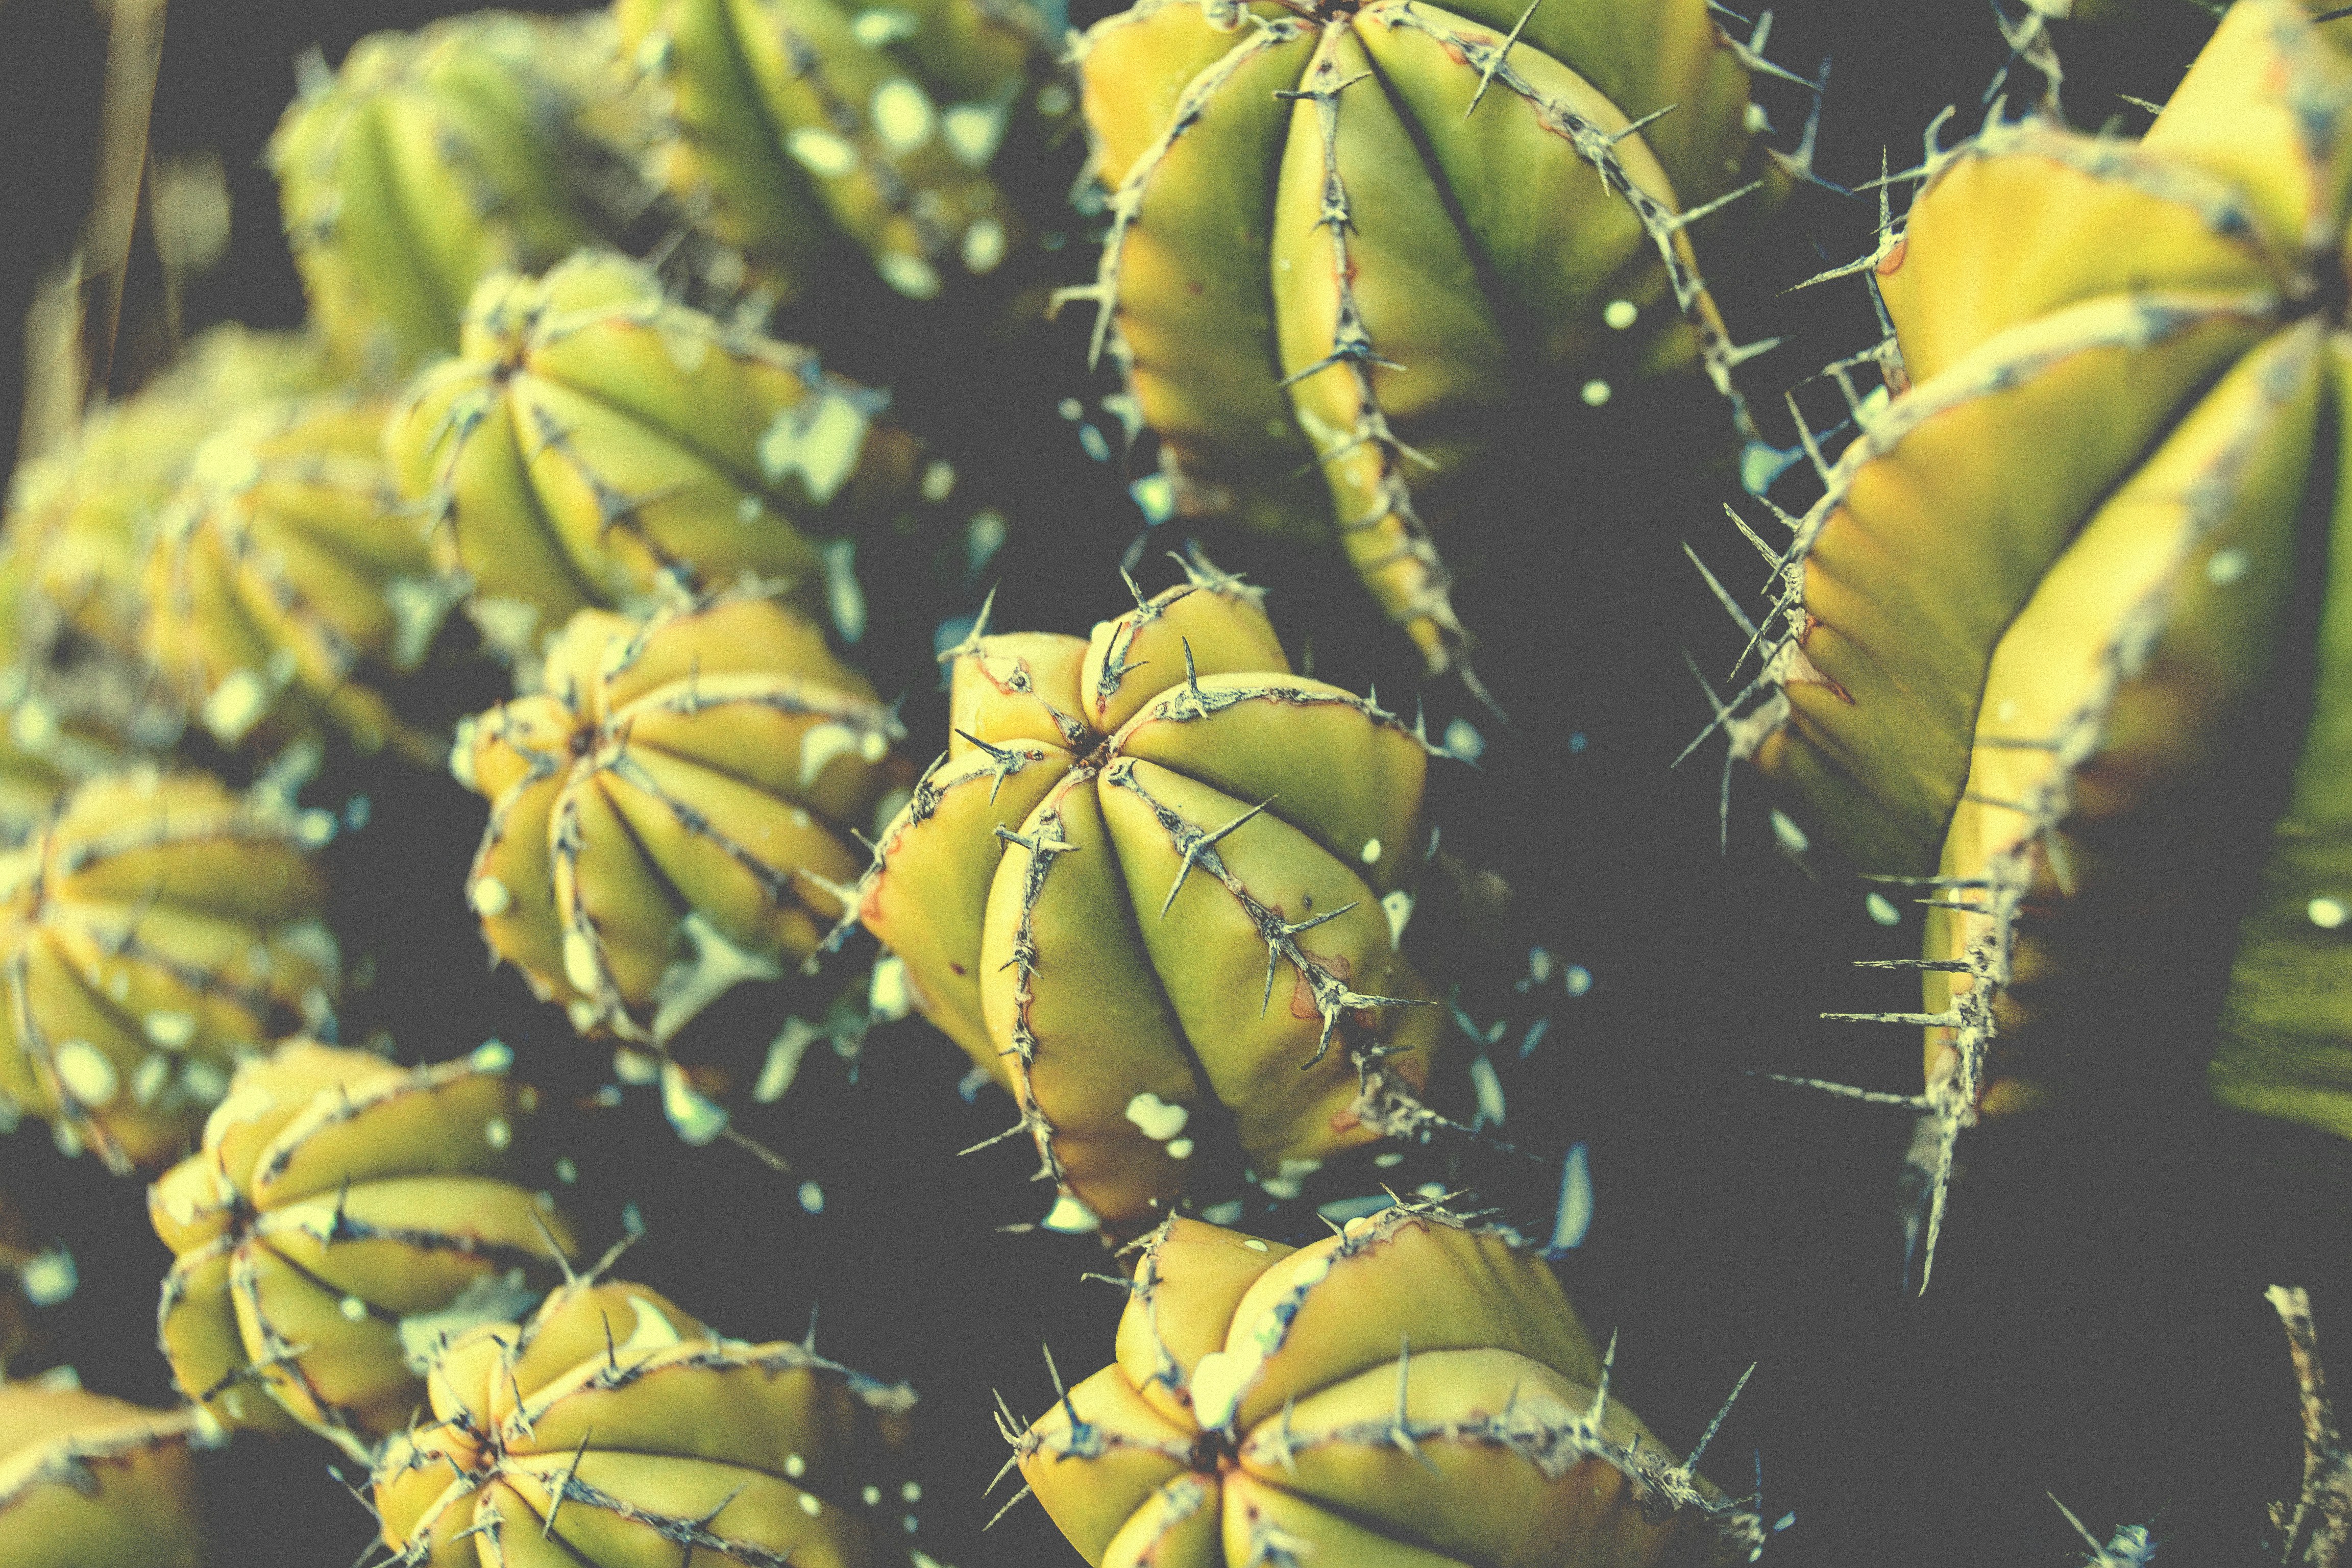 green cactus plant in close-up photography